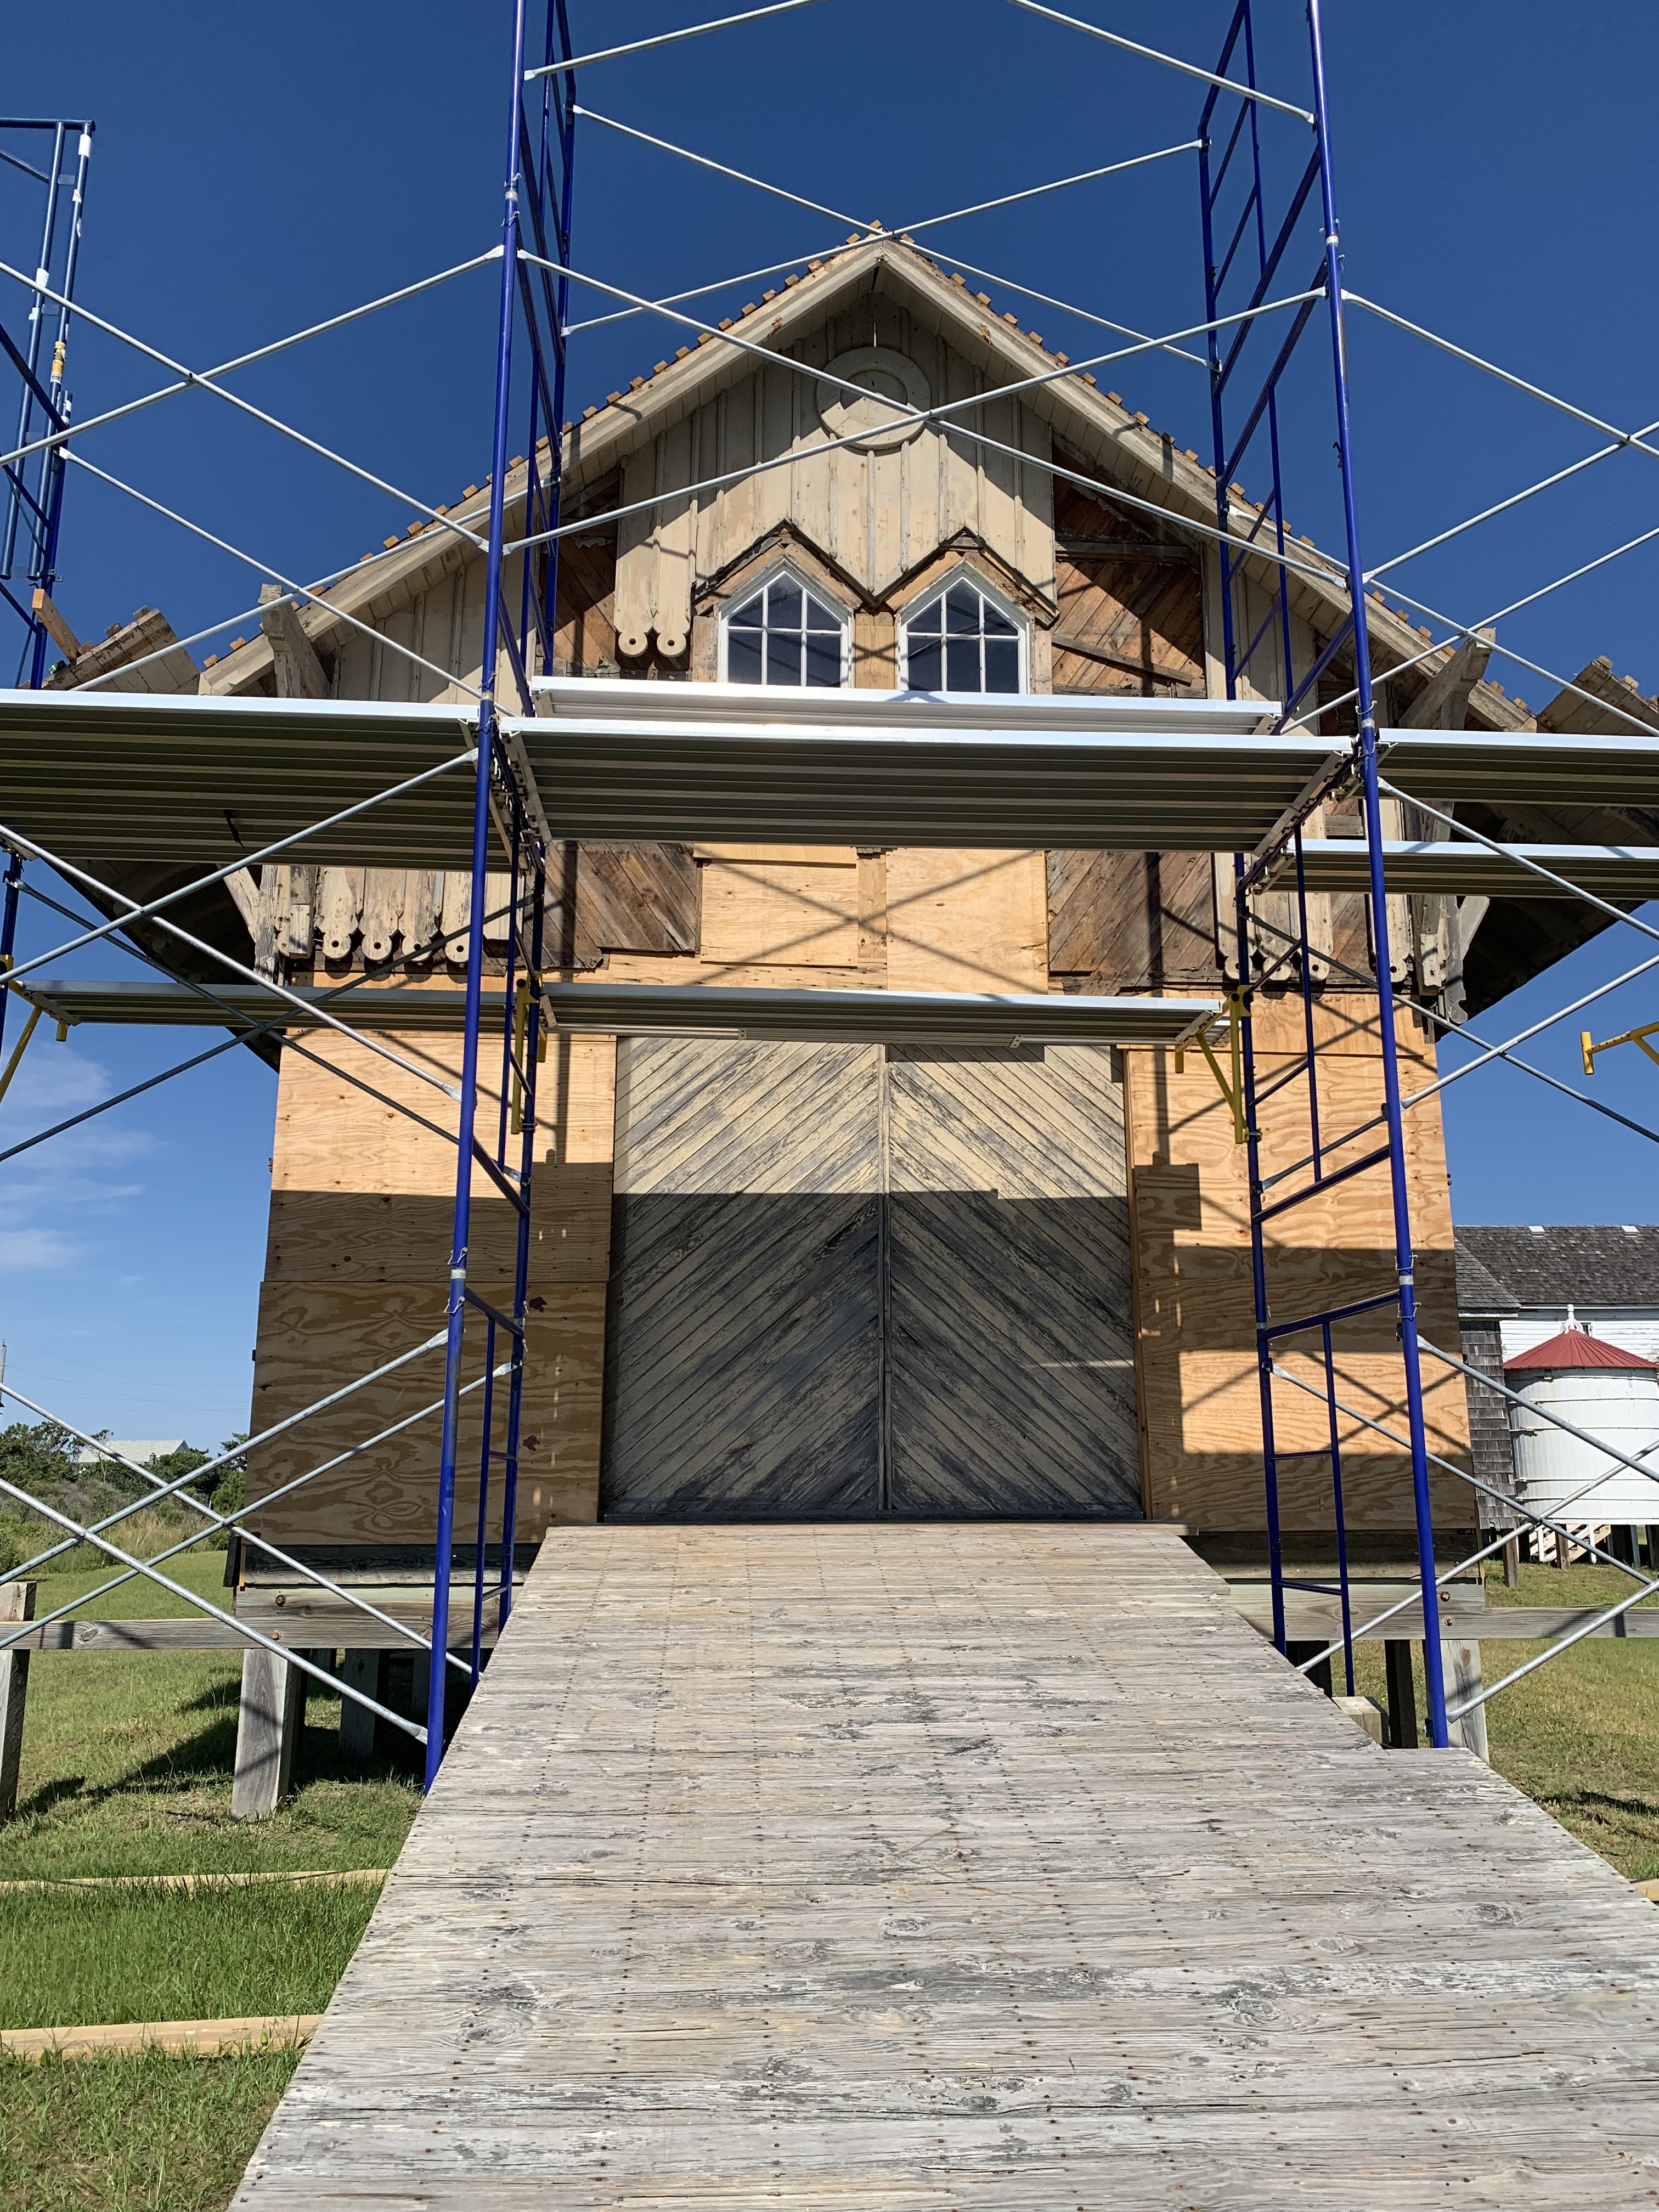 Phase one of the 1874 Life-Saving Station restoration project in Rodanthe. Photo courtesy of the Chicamacomico Historical Association.